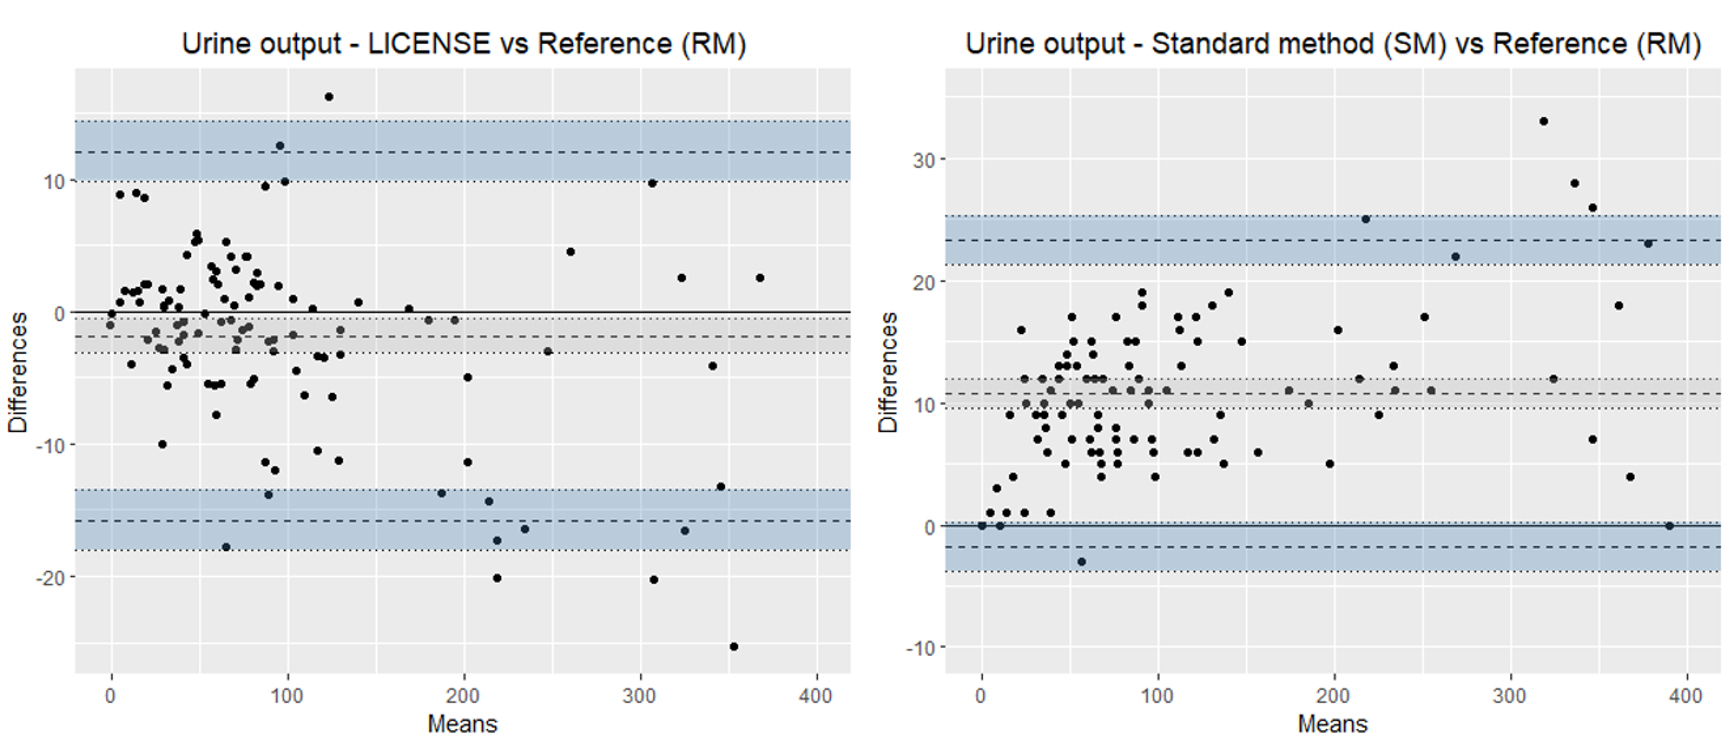 Bland-Altman plots illustrating the agreement of LICENSE with the reference measurement (RM) (left) and standard method (SM) with the reference measurement (RM) (right) in measuring urine output. Note the different scales on the y-axes.